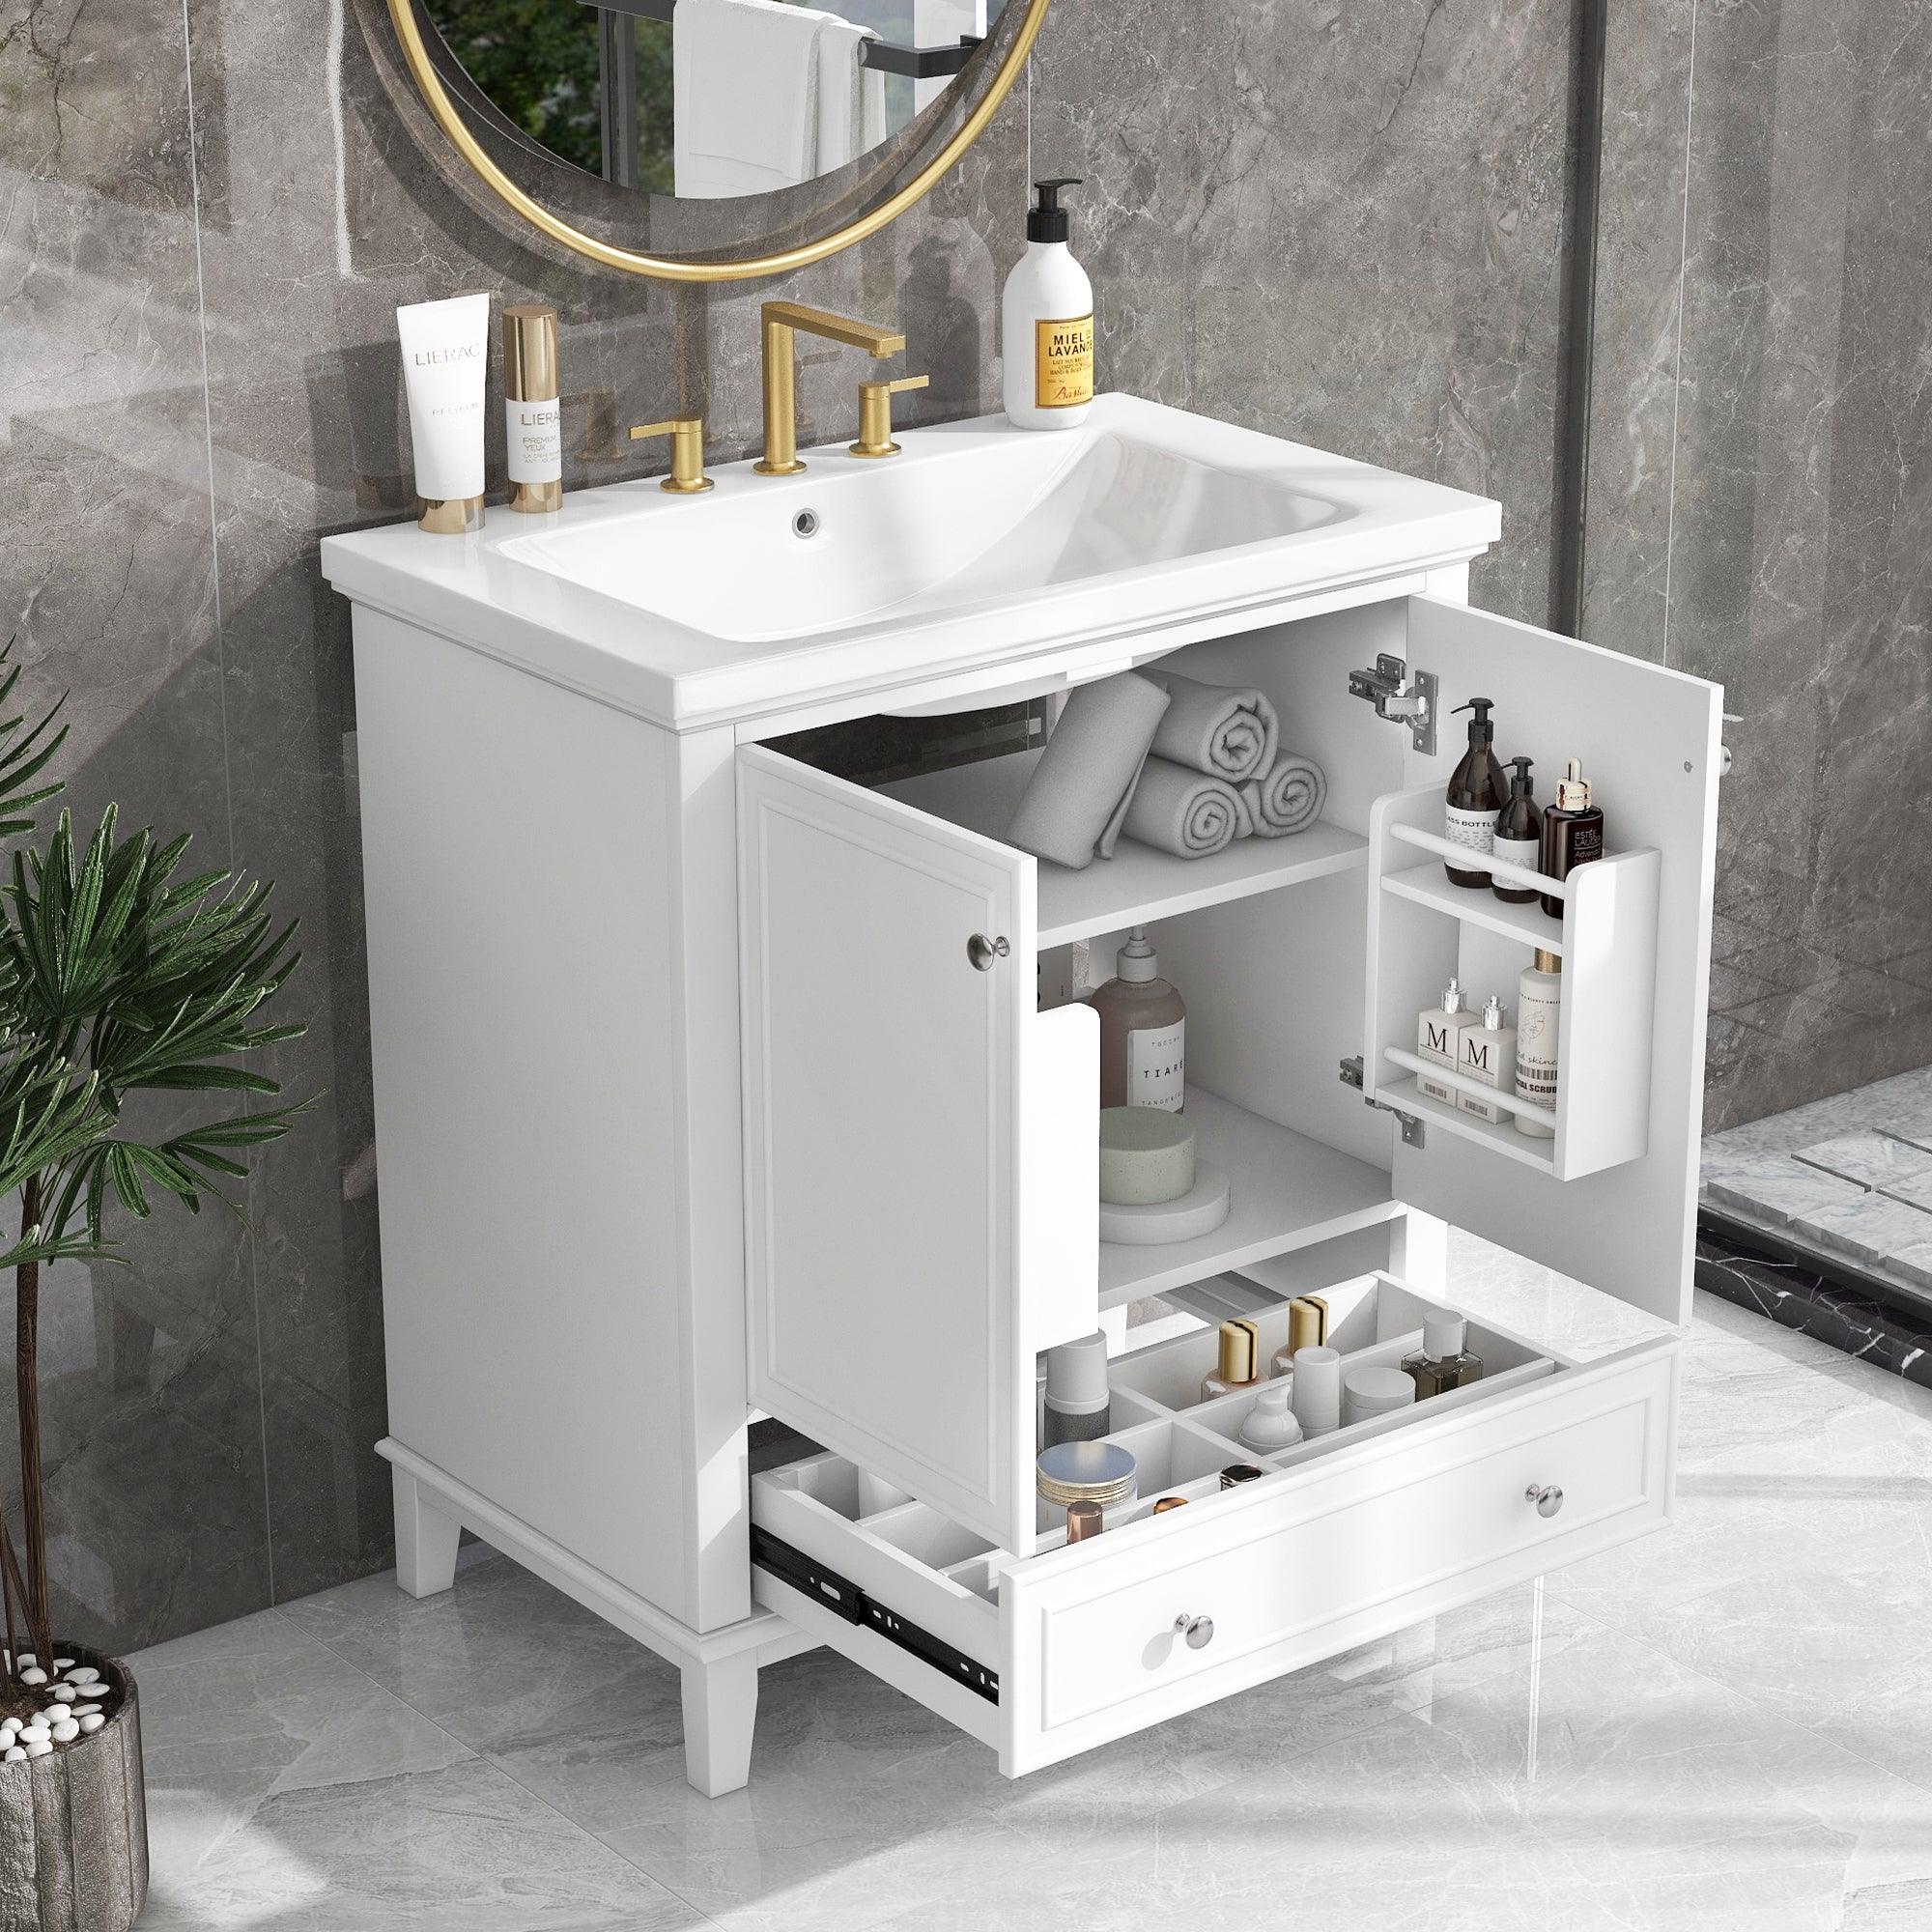 🆓🚛 30" Bathroom Vanity With Sink Combo, Multi-Functional Bathroom Cabinet With Doors & Drawer, Solid Frame & Mdf Board, White